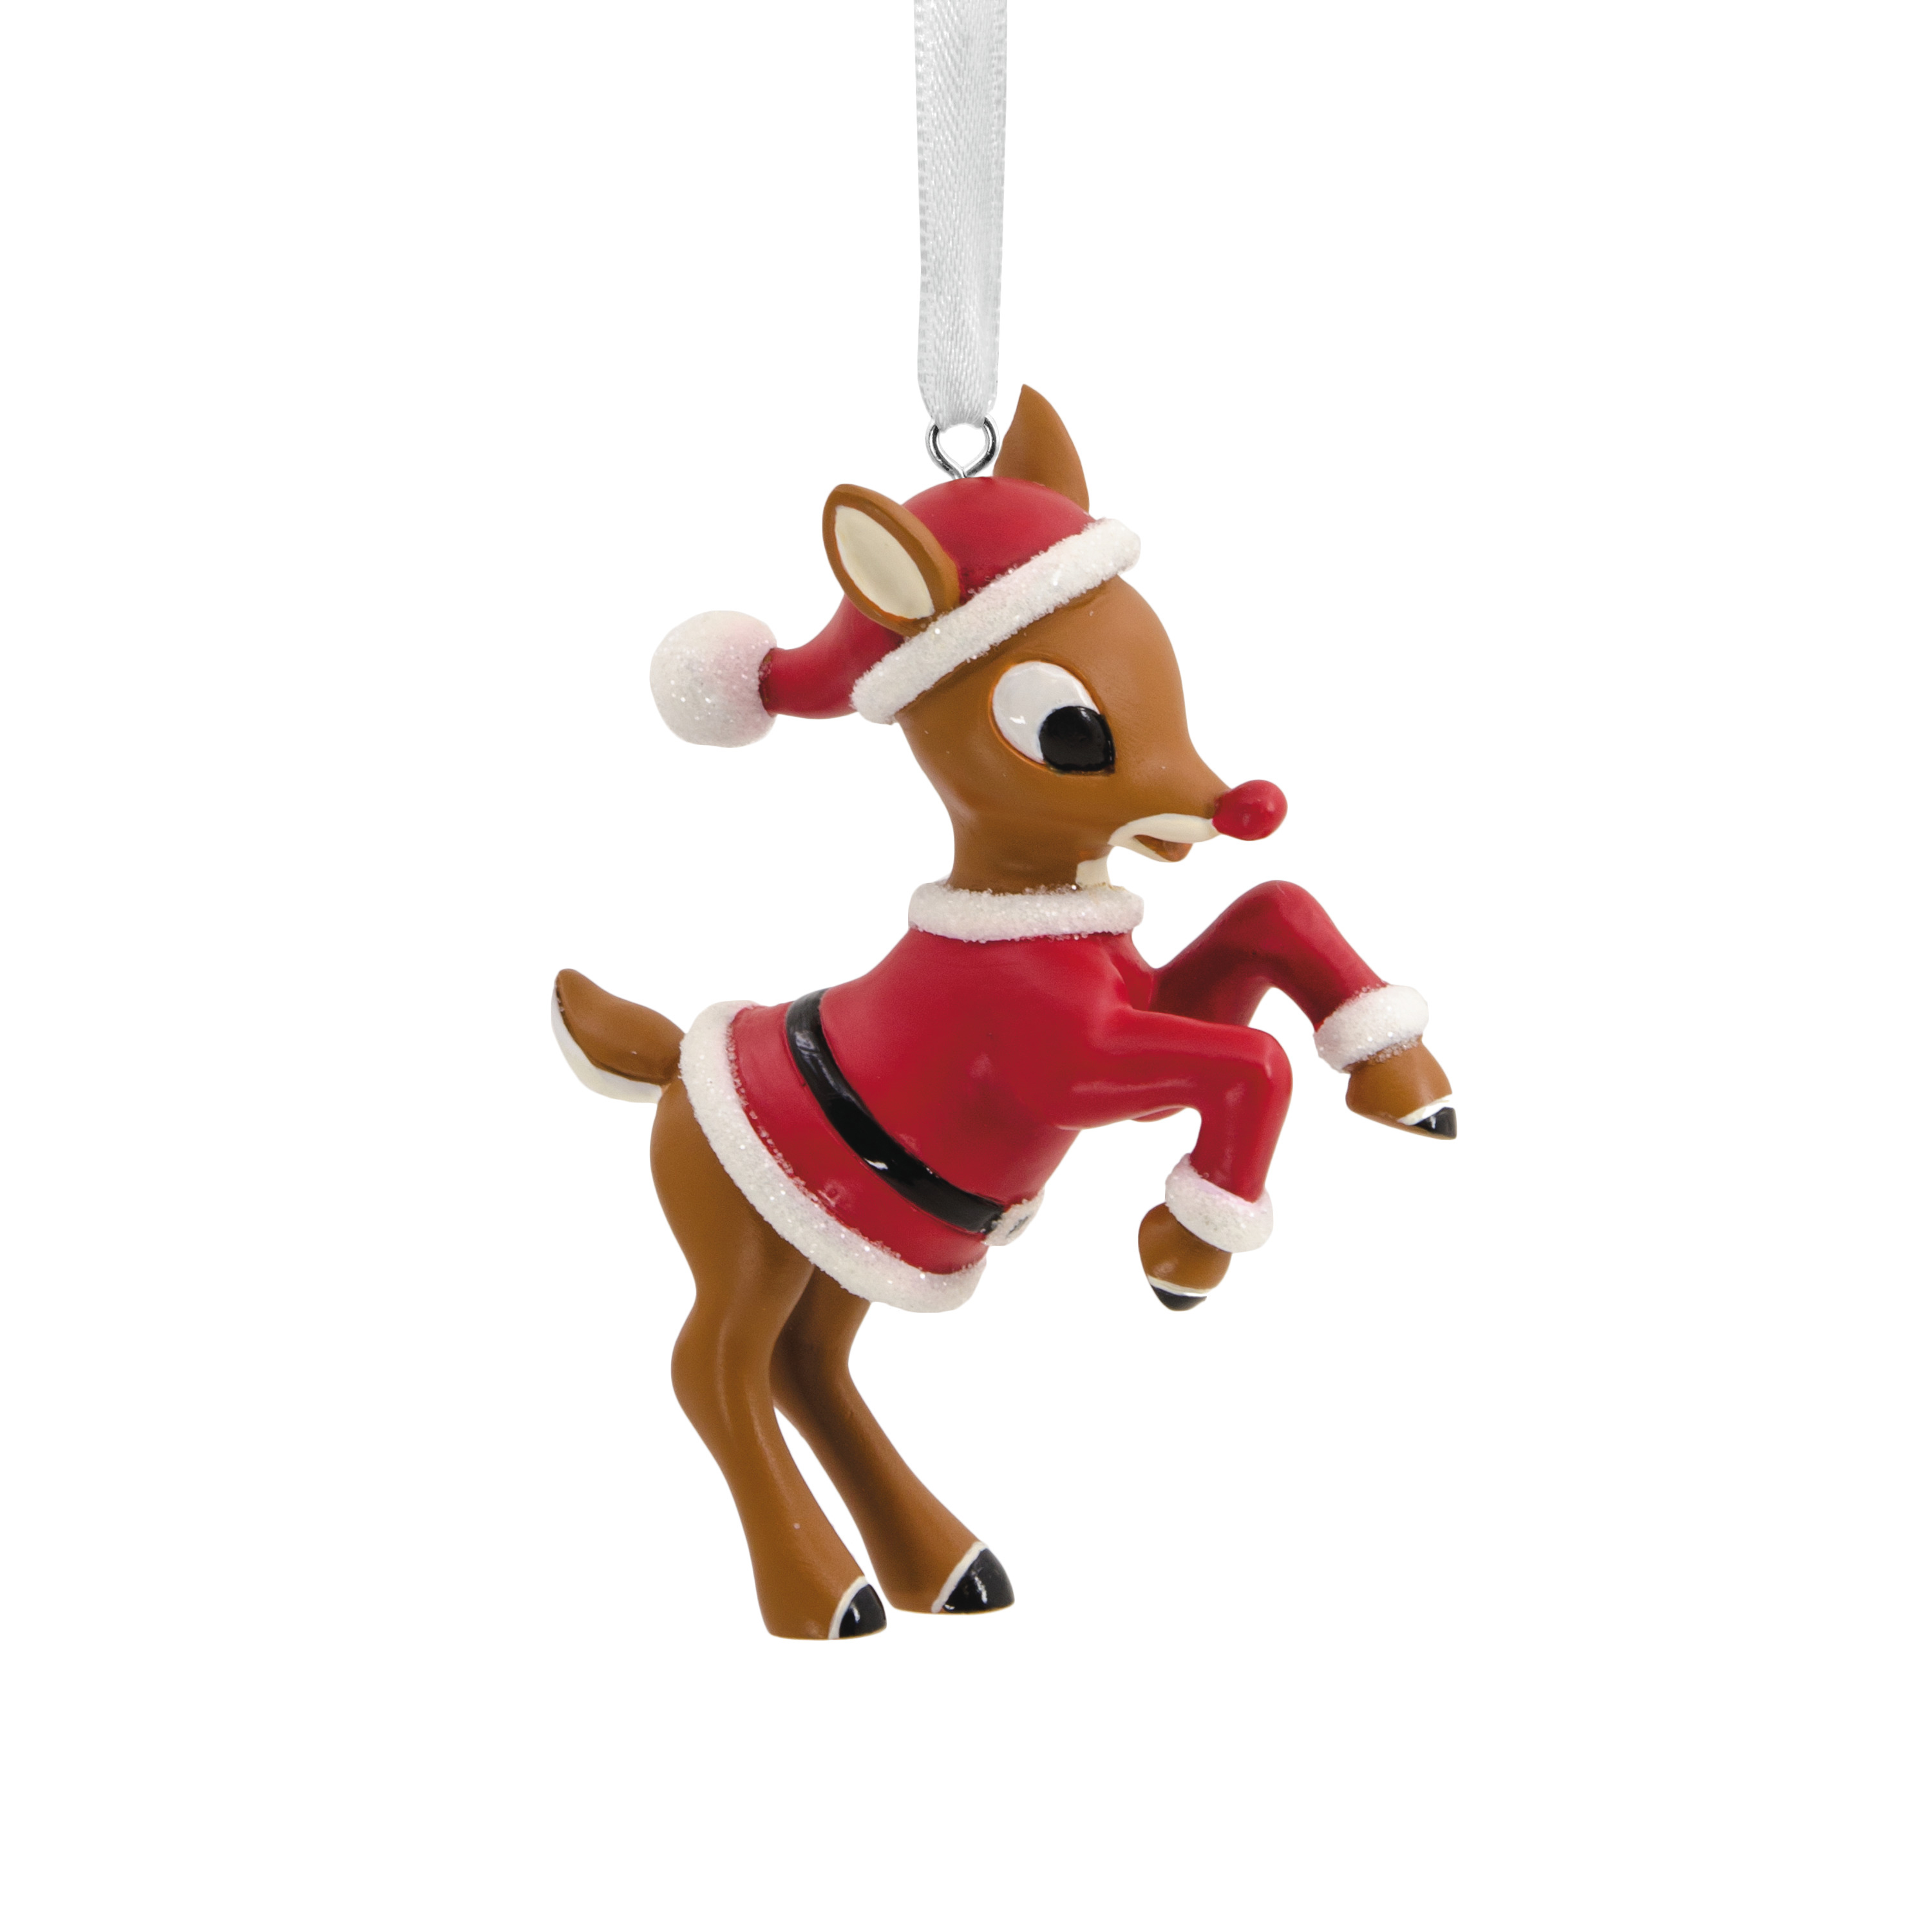 Hallmark Rudolph the Red Nosed Reindeer in Santa Suit Christmas Ornament 763795539123